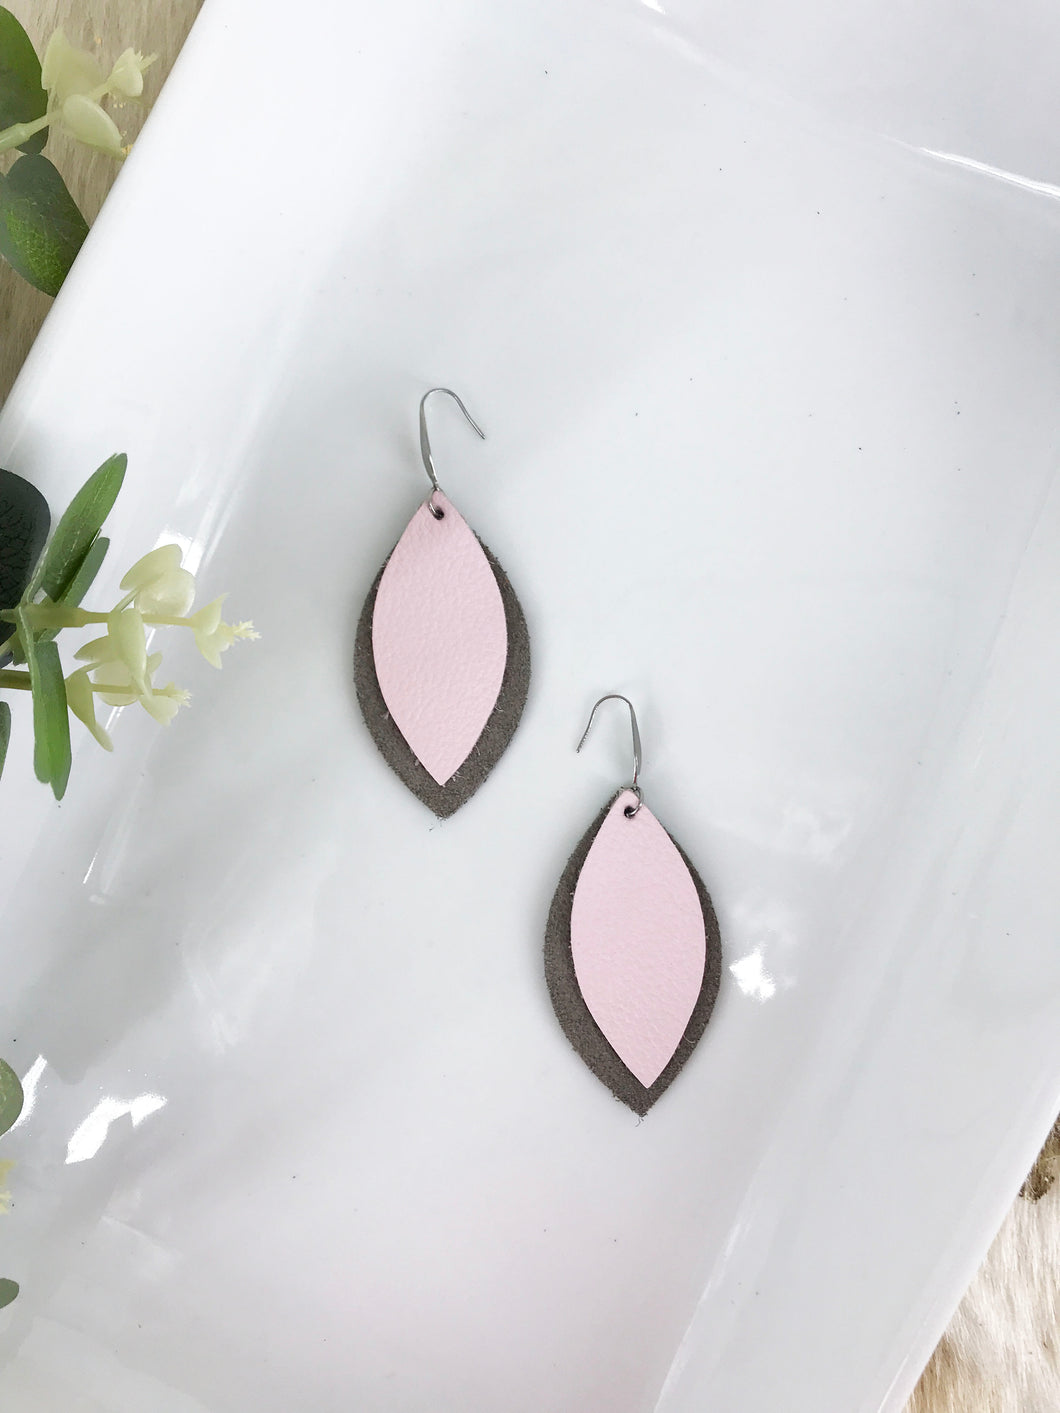 Gray Suede and Baby Pink Leather Earrings - E19-1132